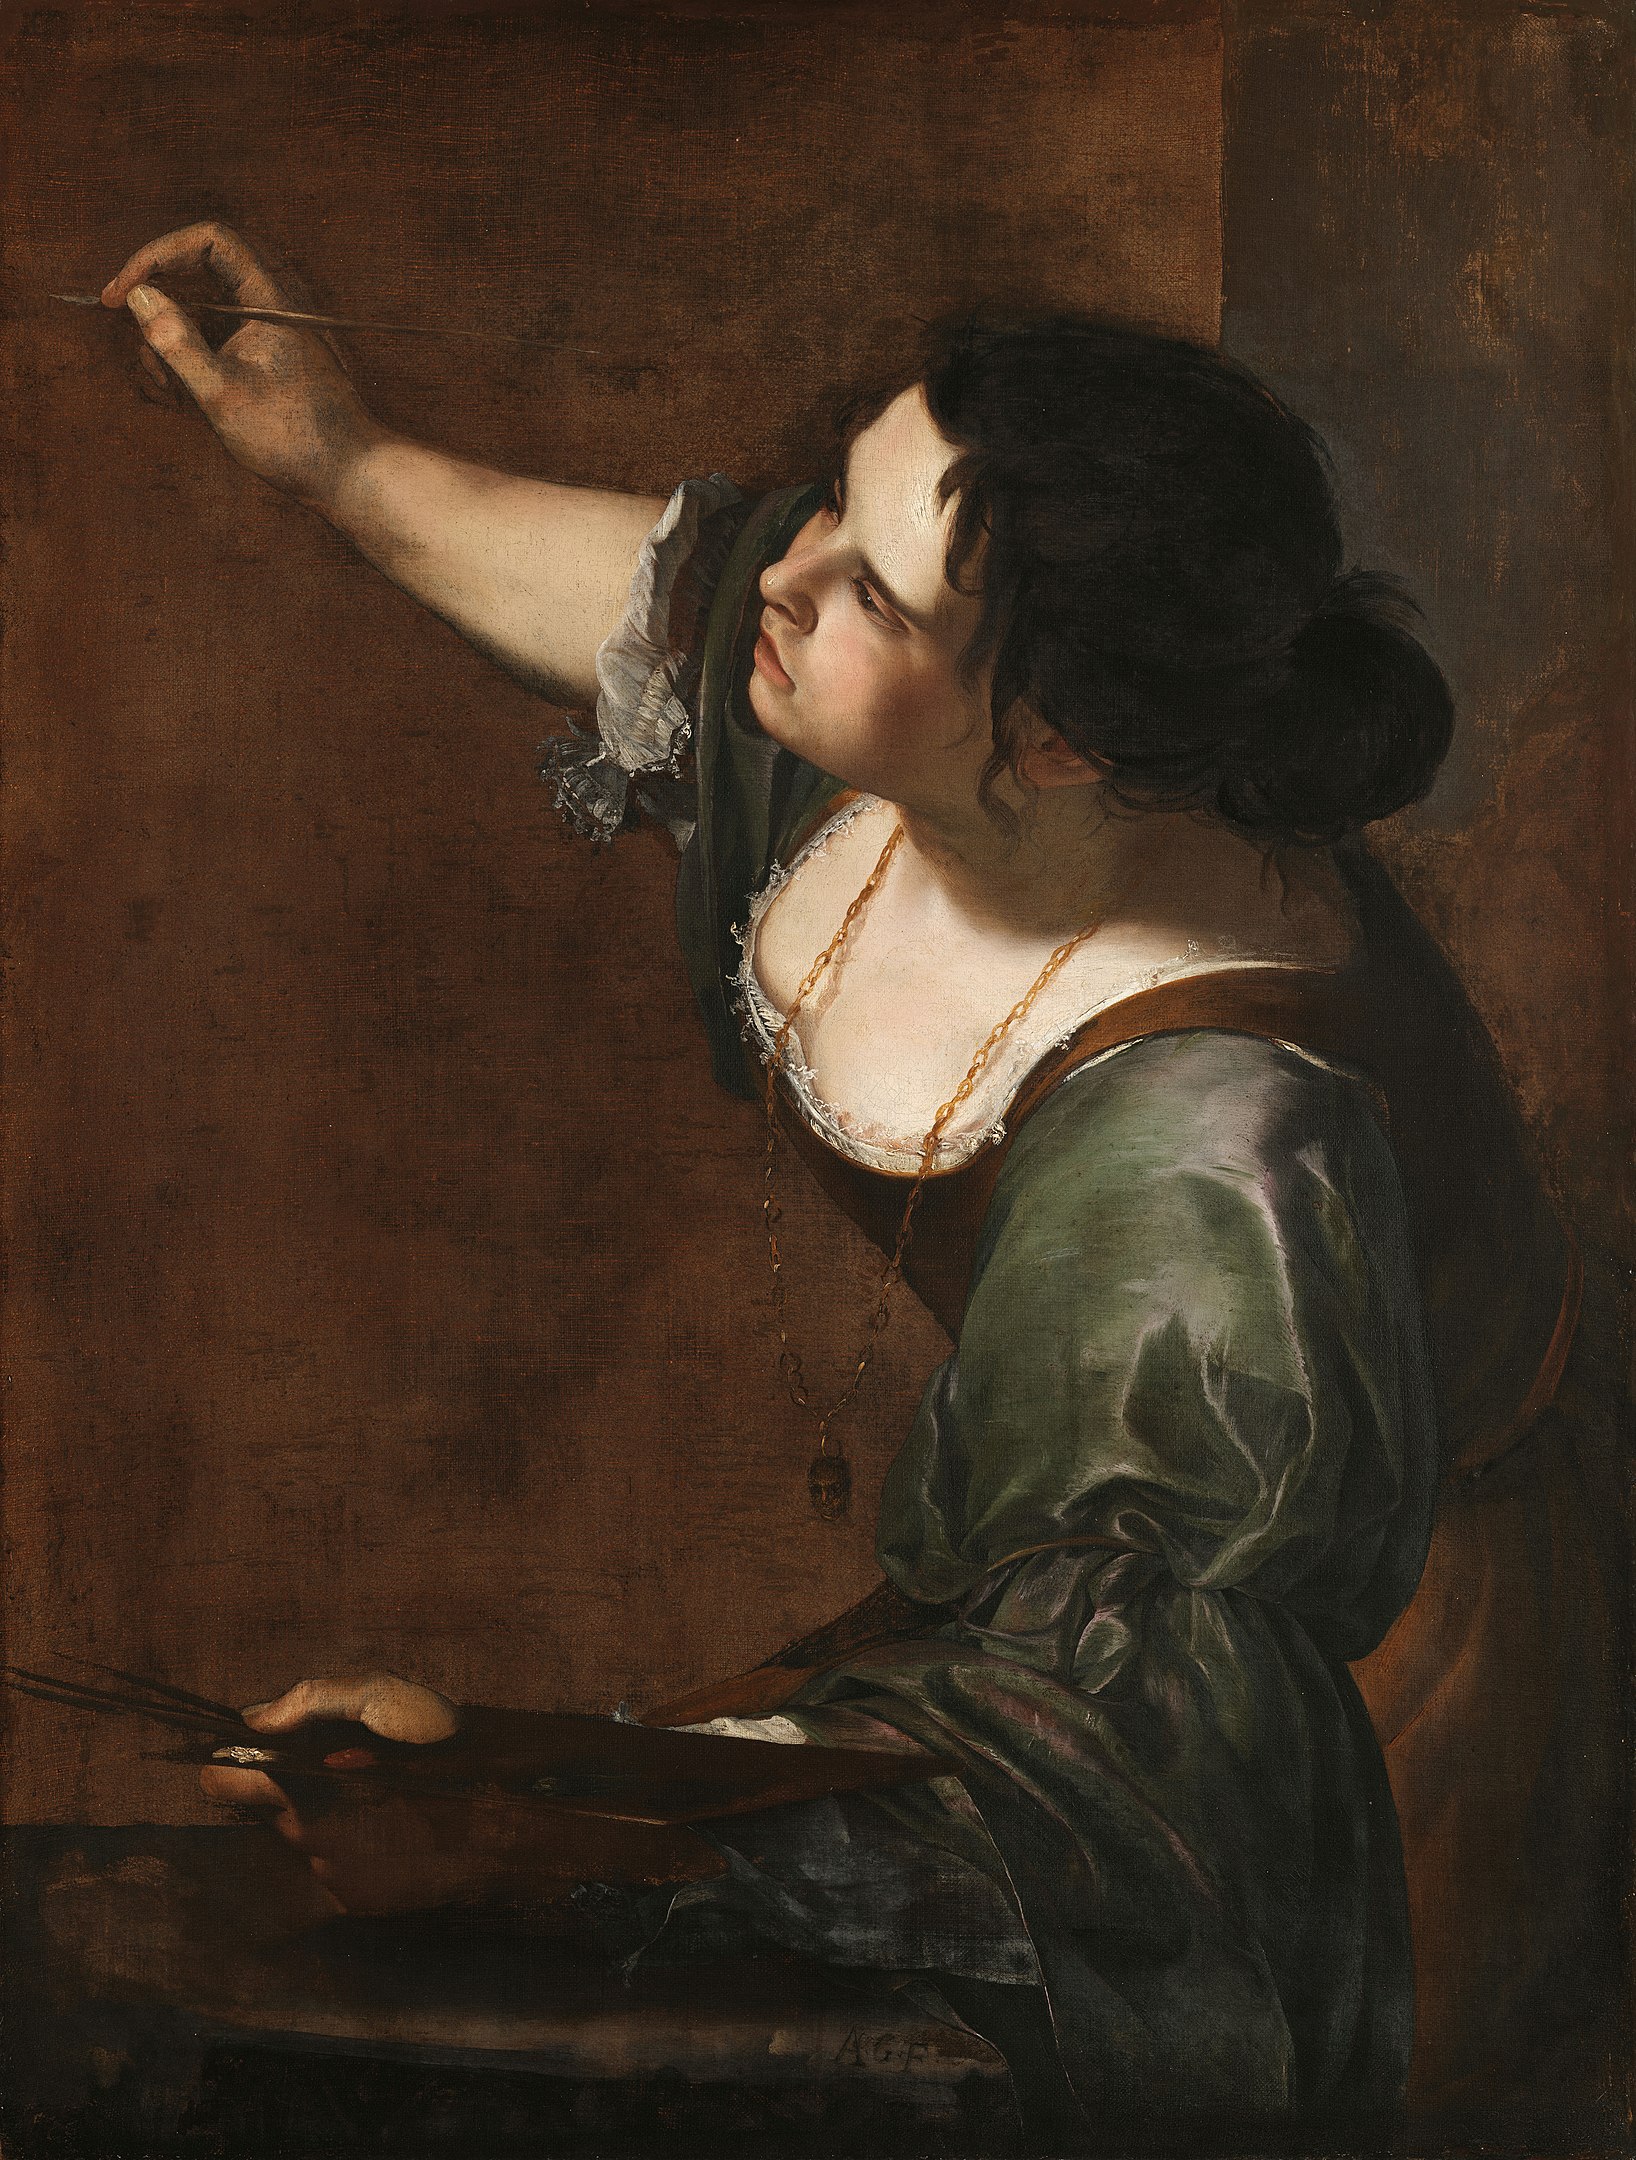 A portrait of a woman immersed in the act of painting